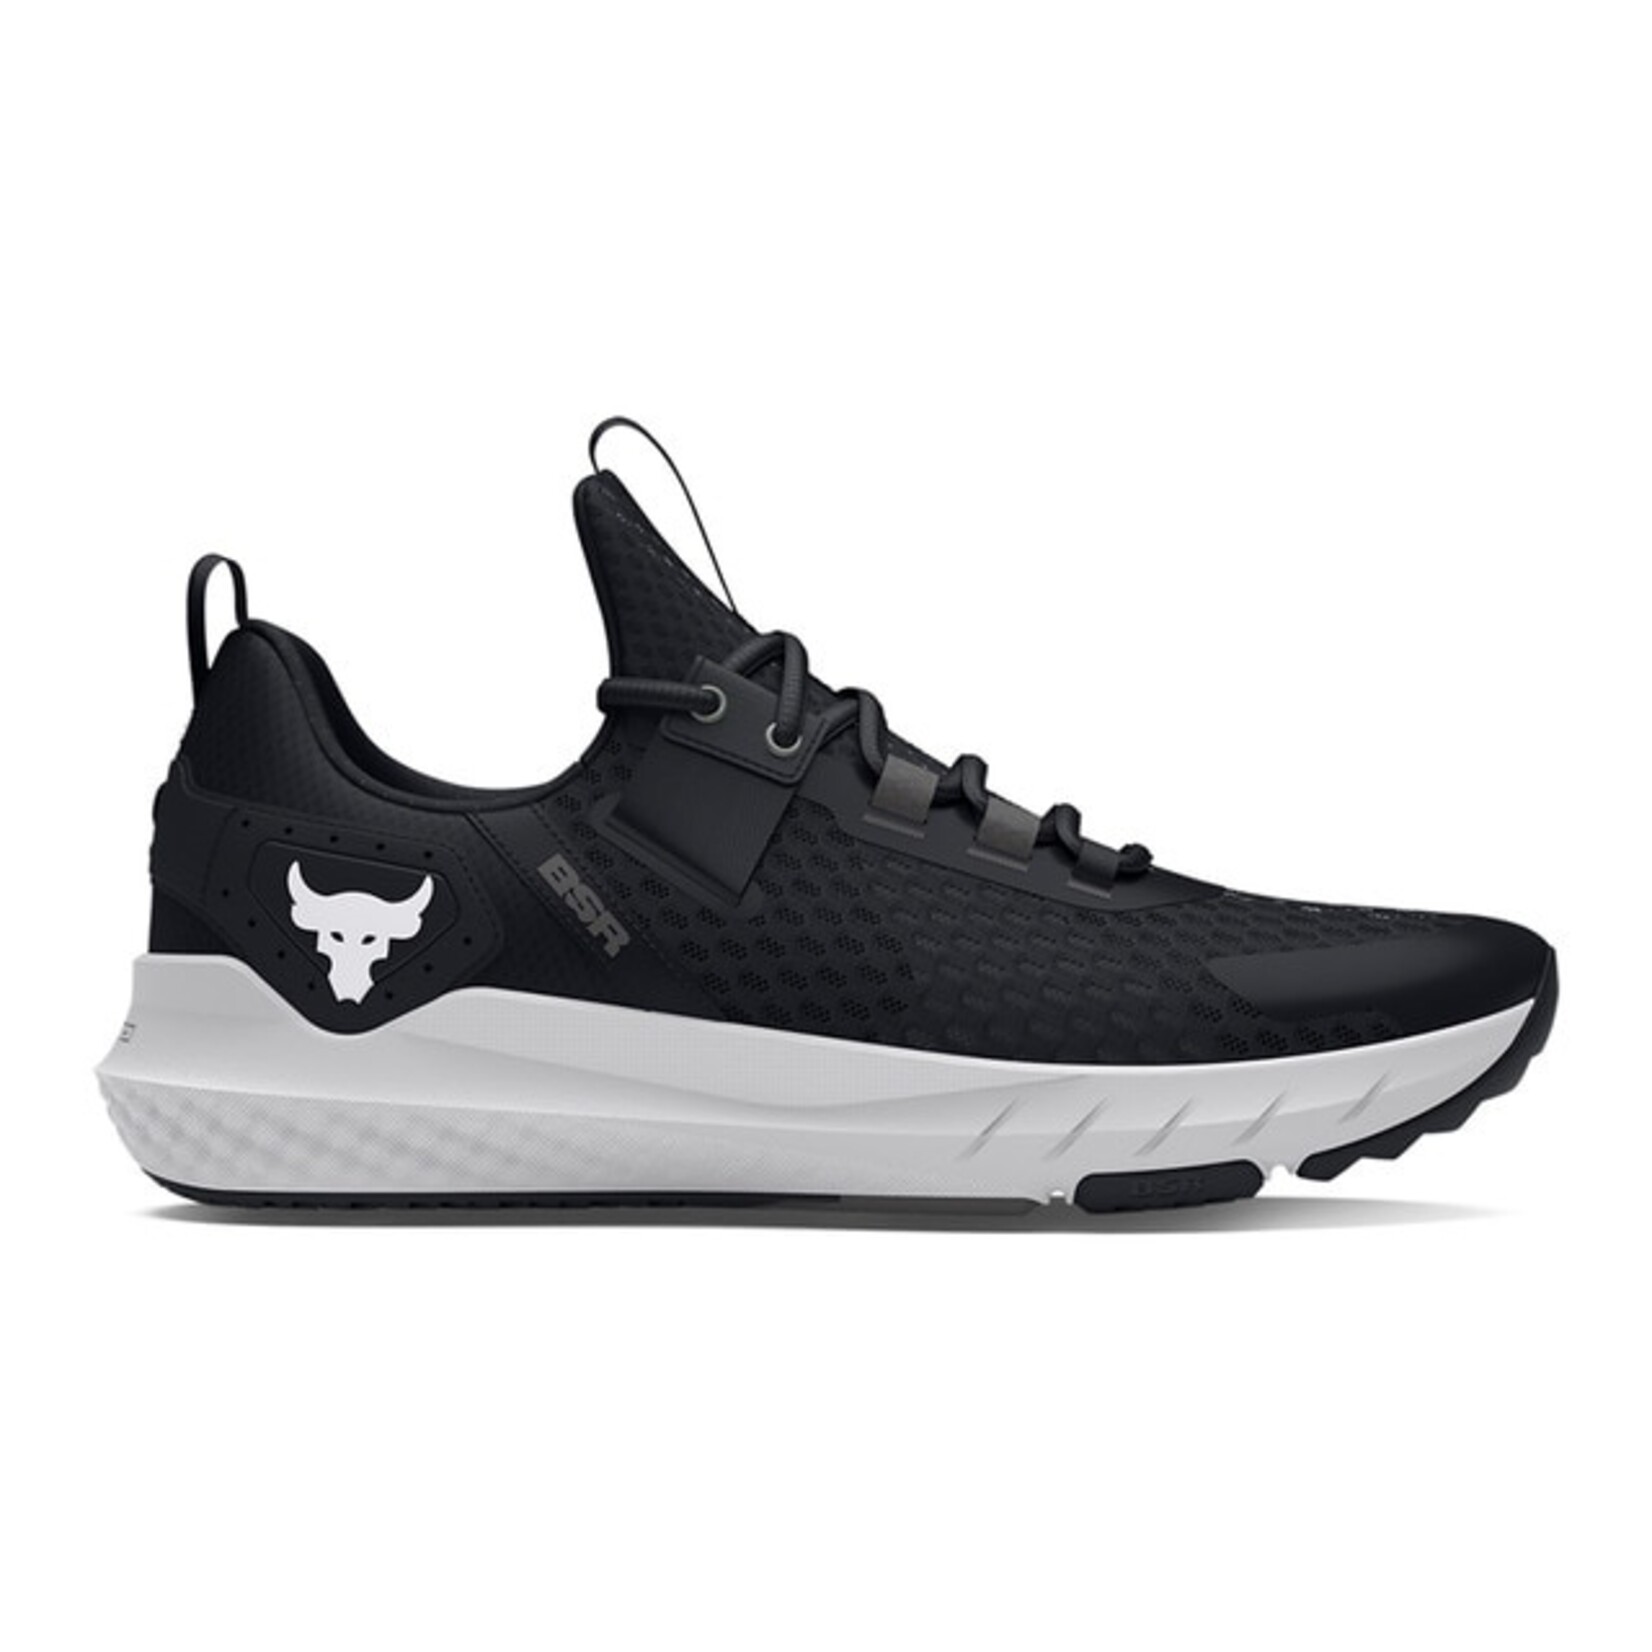 Under Armour Under Armour Training Shoes, Project Rock BSR 4, Mens